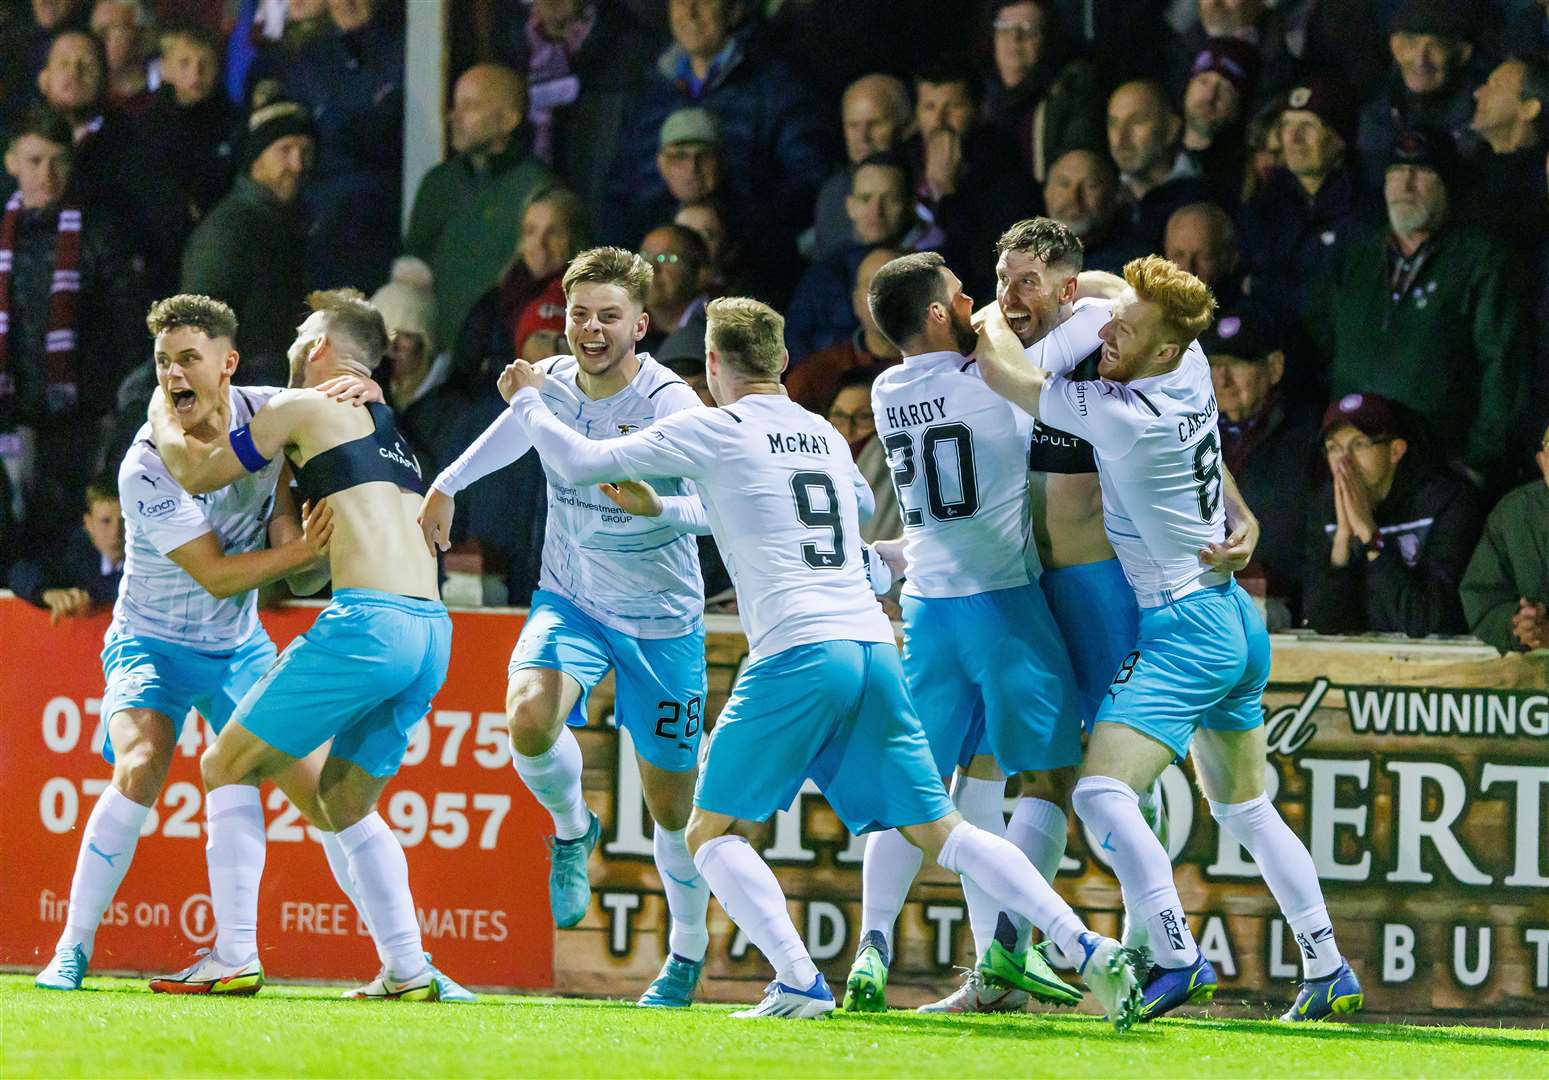 Inverness Caledonian Thistle reached the play-off final last season. Picture: Ken Macpherson